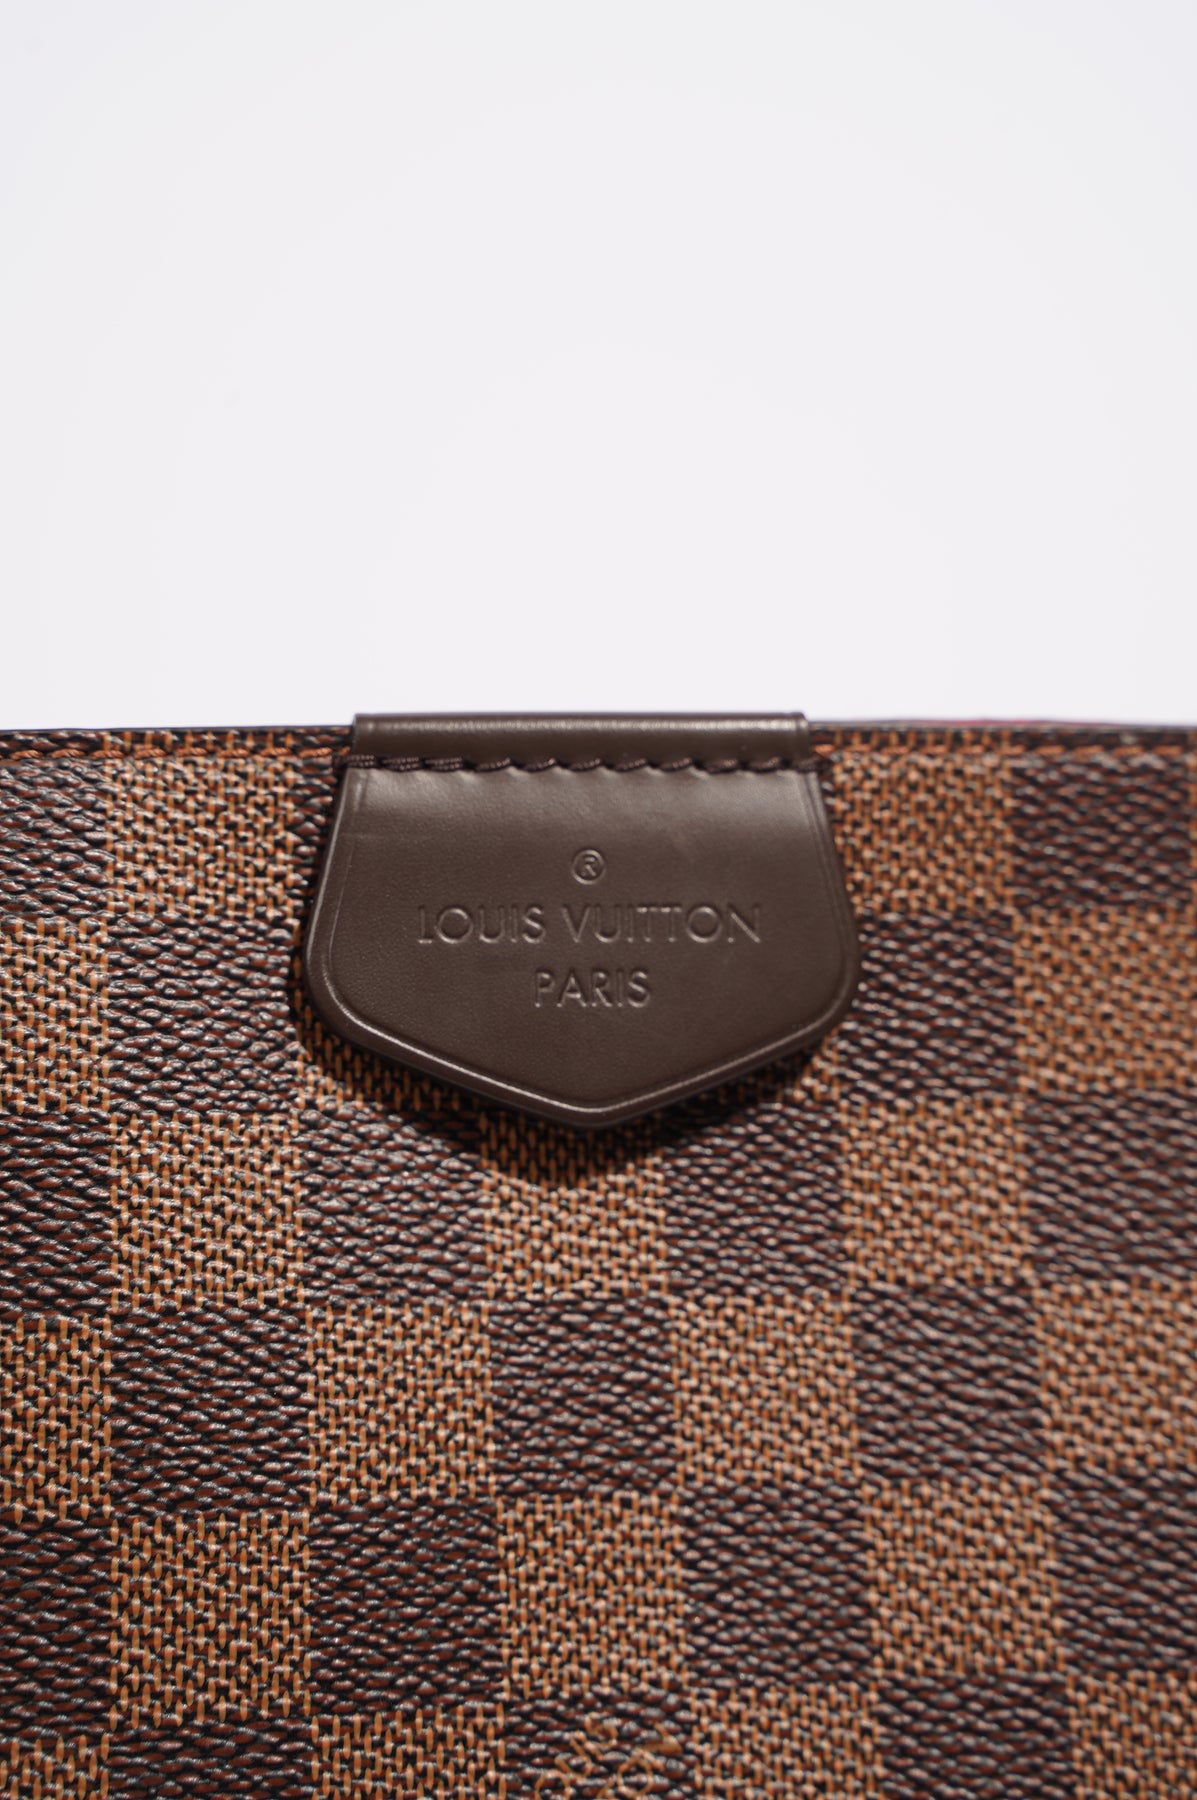 Louis Vuitton graceful PM in damier ebene – Lady Clara's Collection